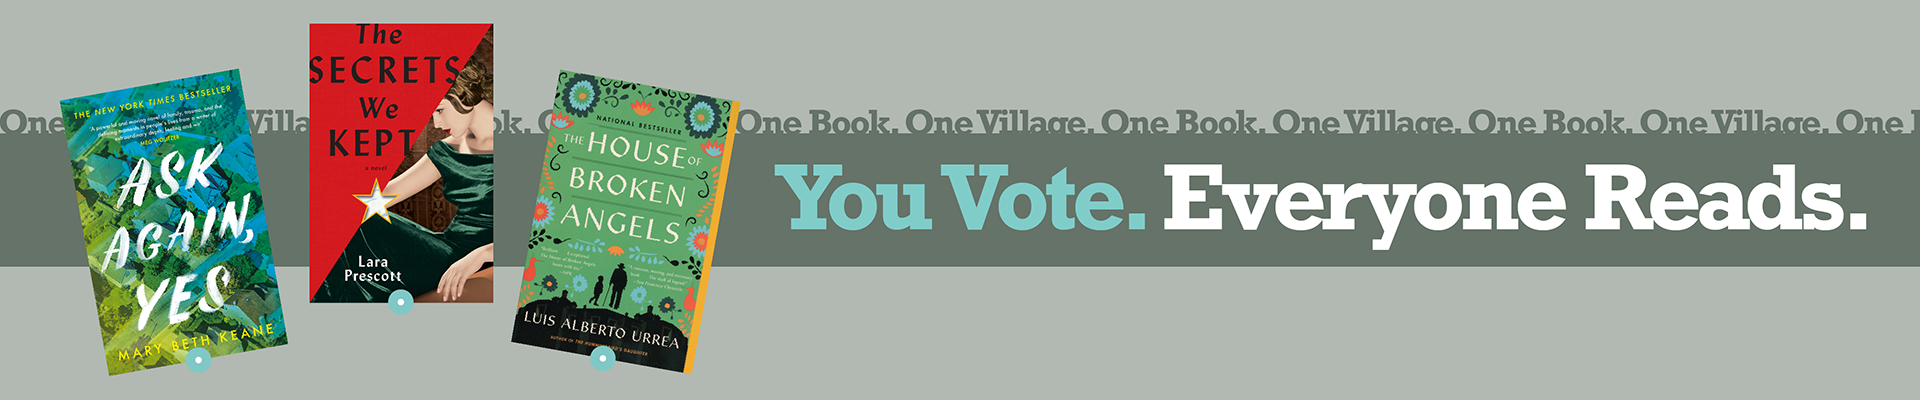 You Vote. Everyone Reads. One Book, One Village 2020 logo.